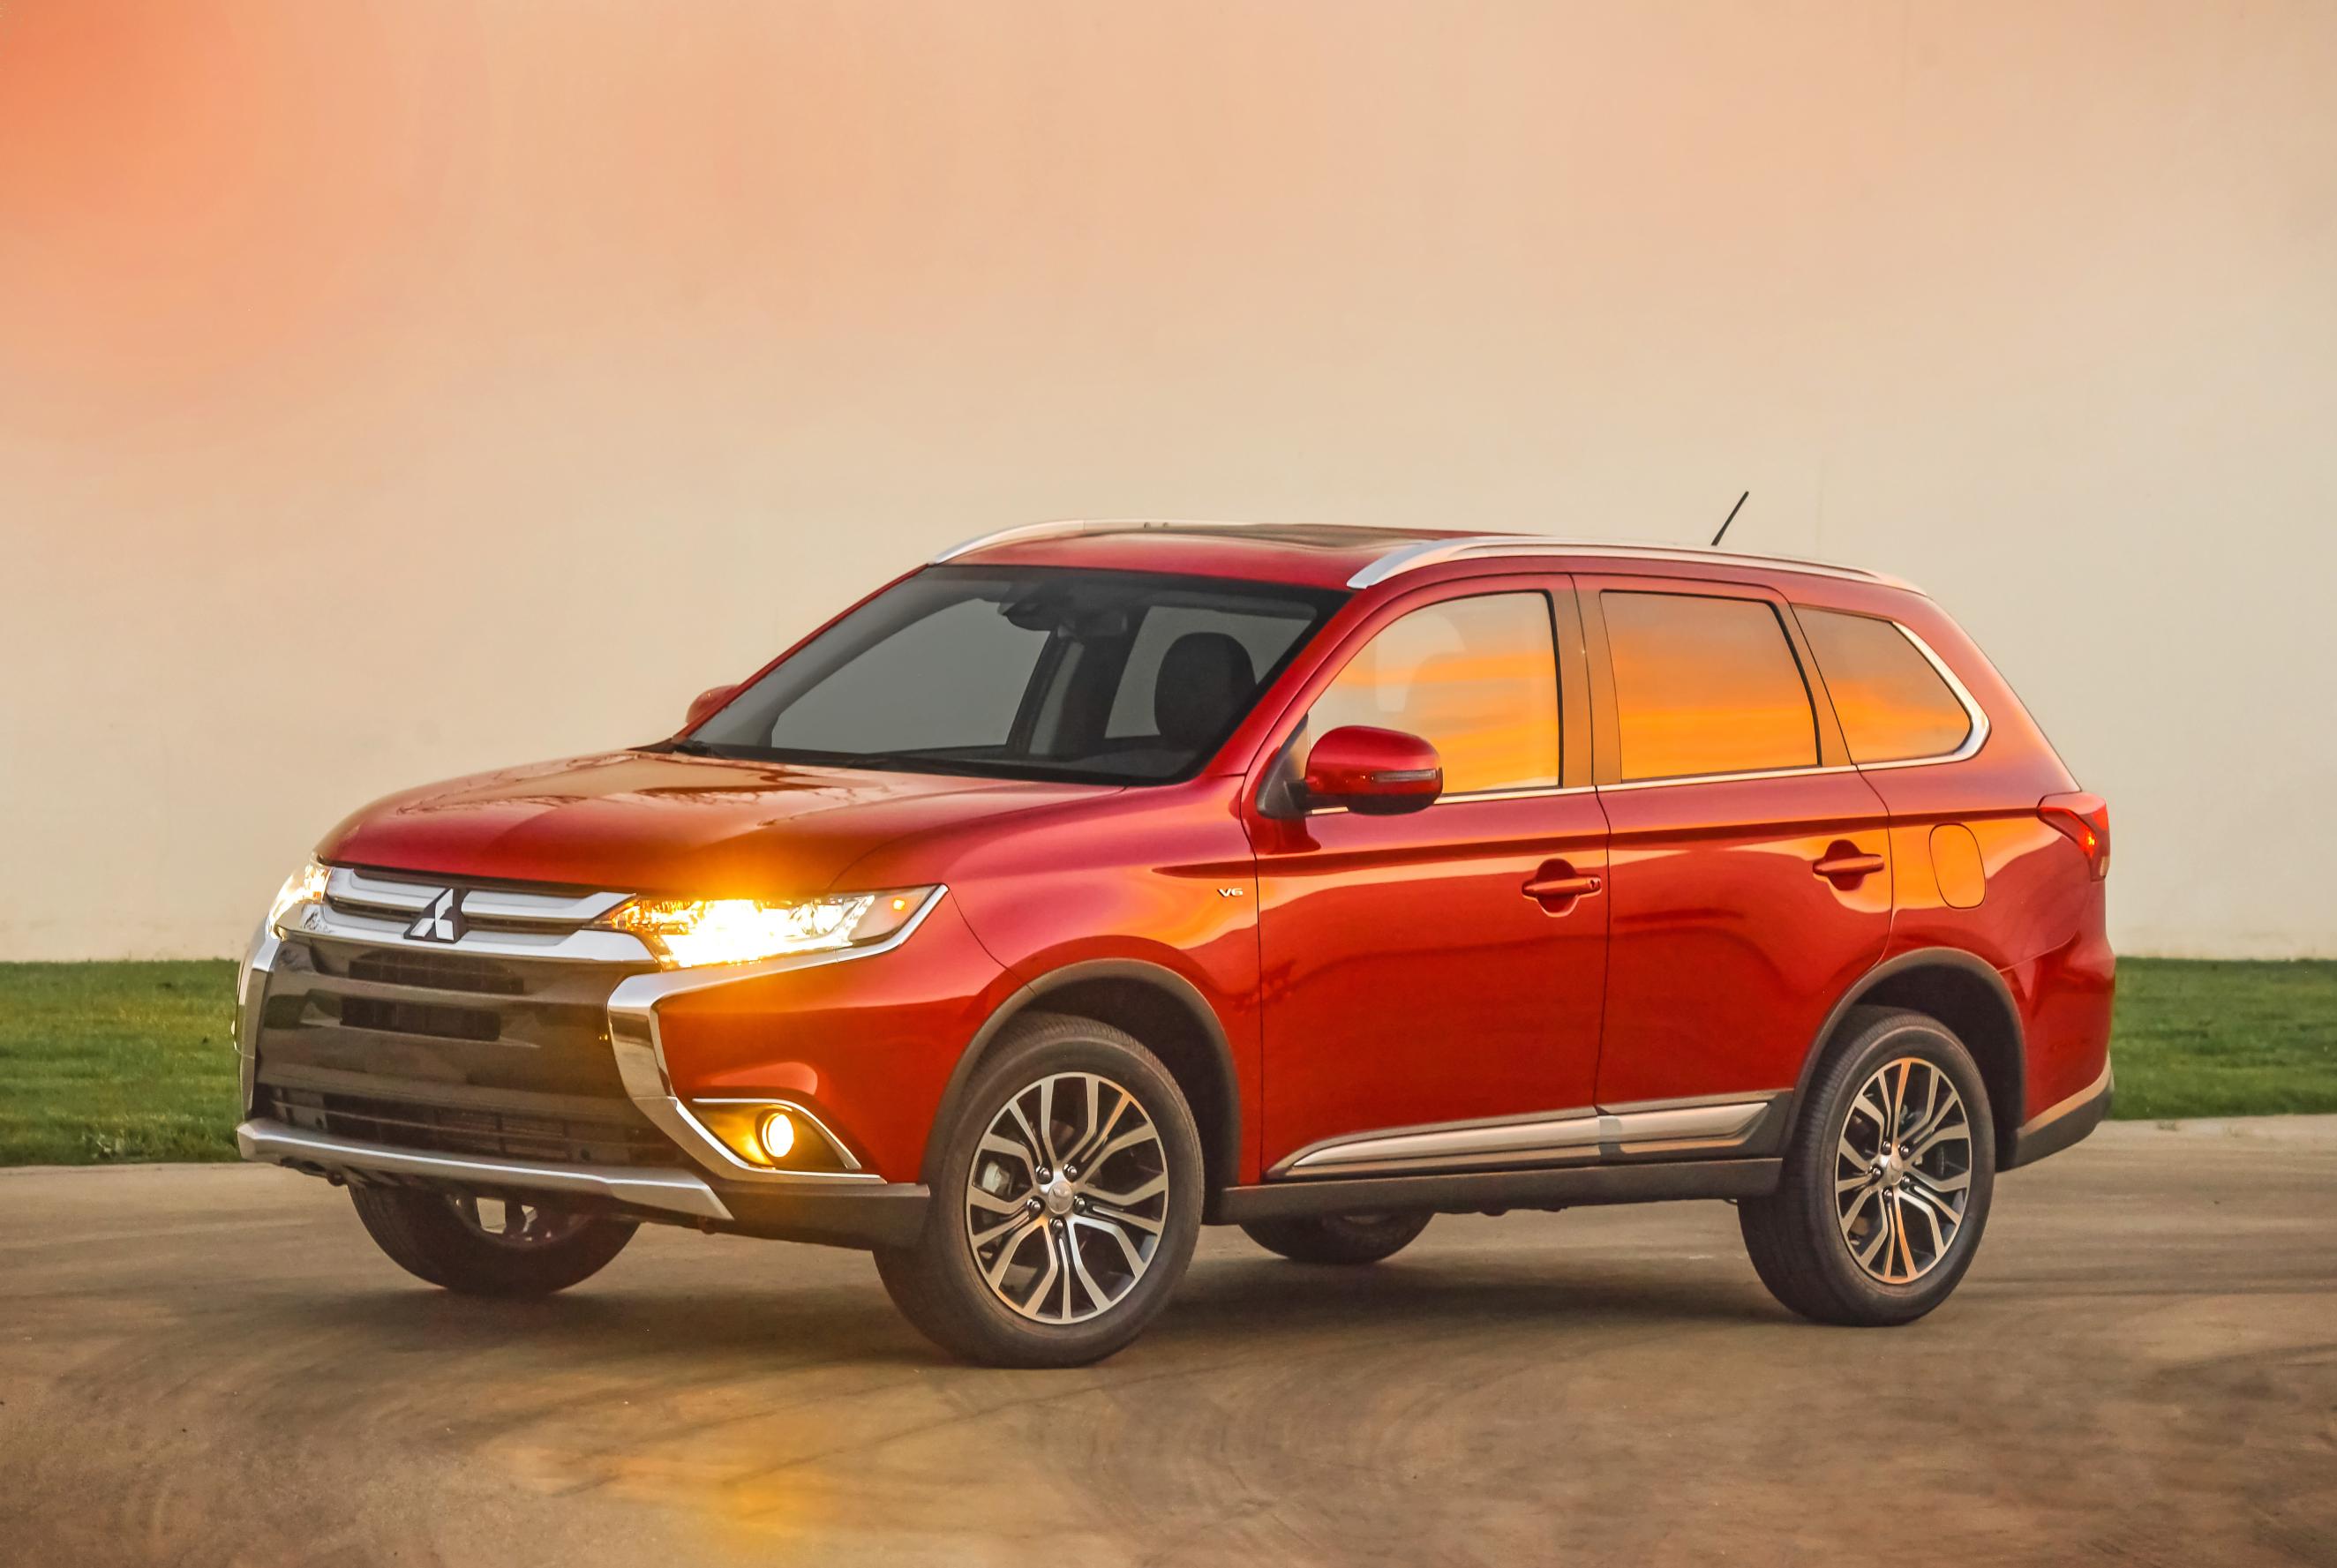 2016 Mitsubishi Outlander Features More of Everything - autoevolution